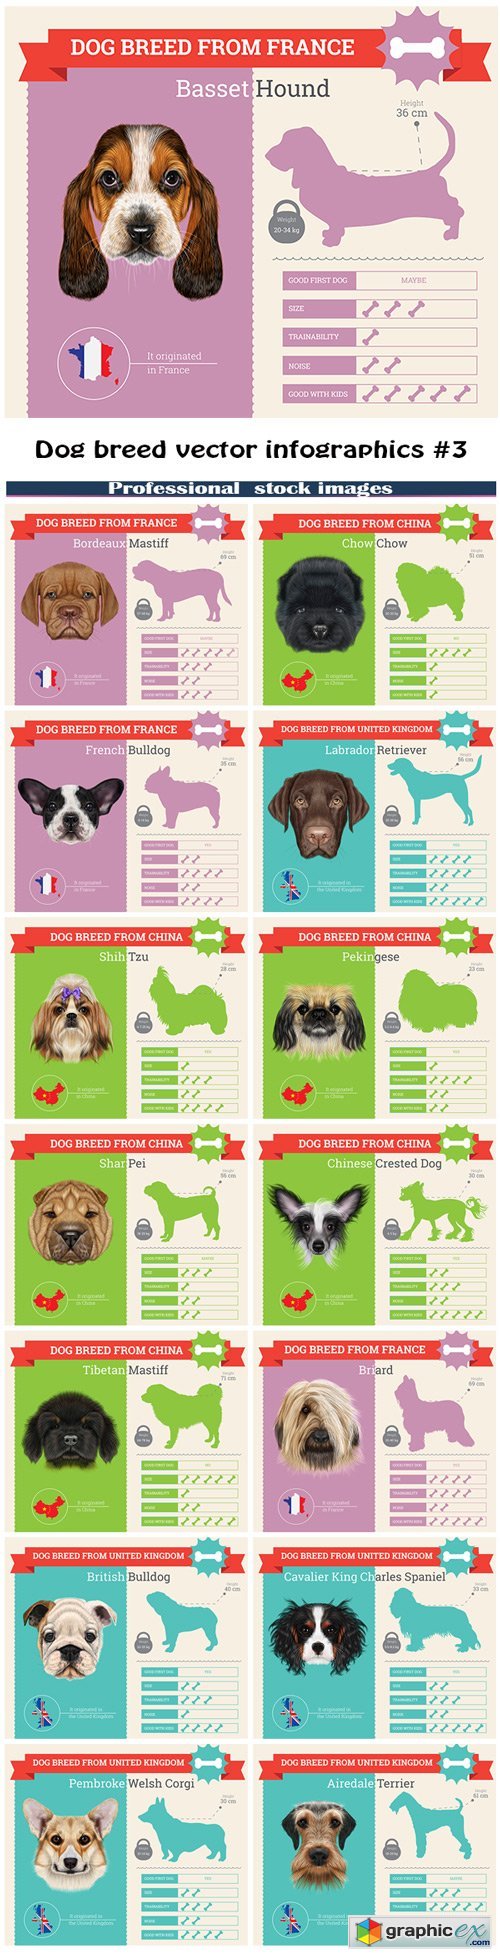 Dog breed vector infographics #3